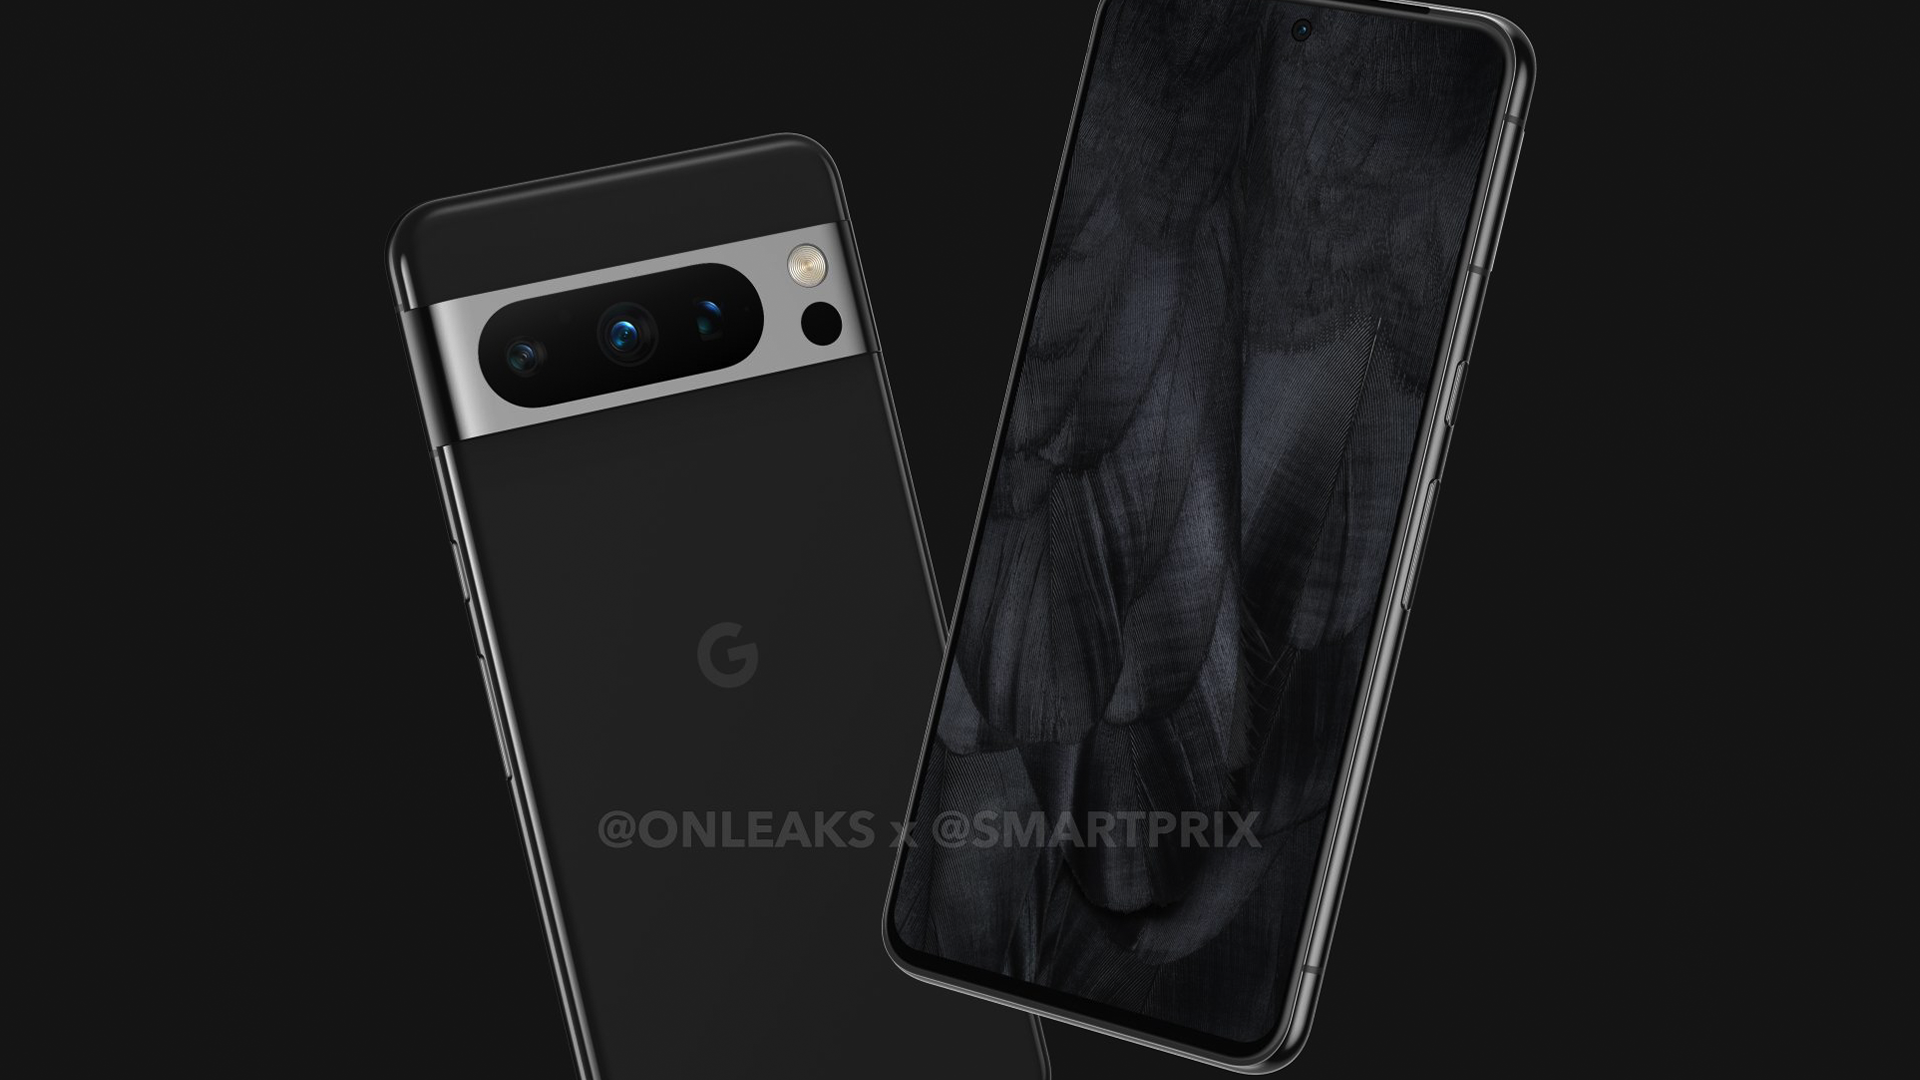 Render of the front and back of the Google Pixel 8 Pro based on leaked information